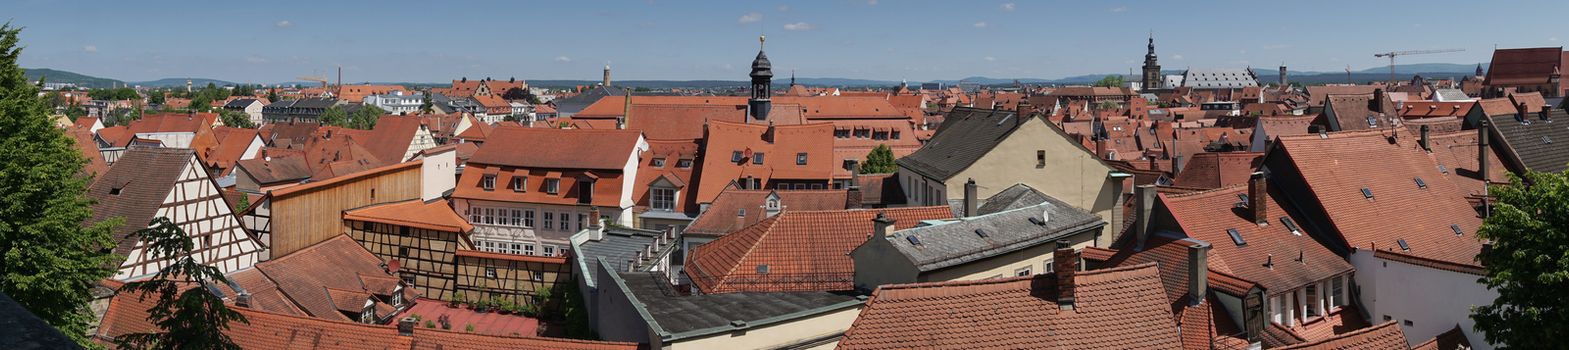 View over the roofs of Bamberg, Bavaria, Germany, Europe